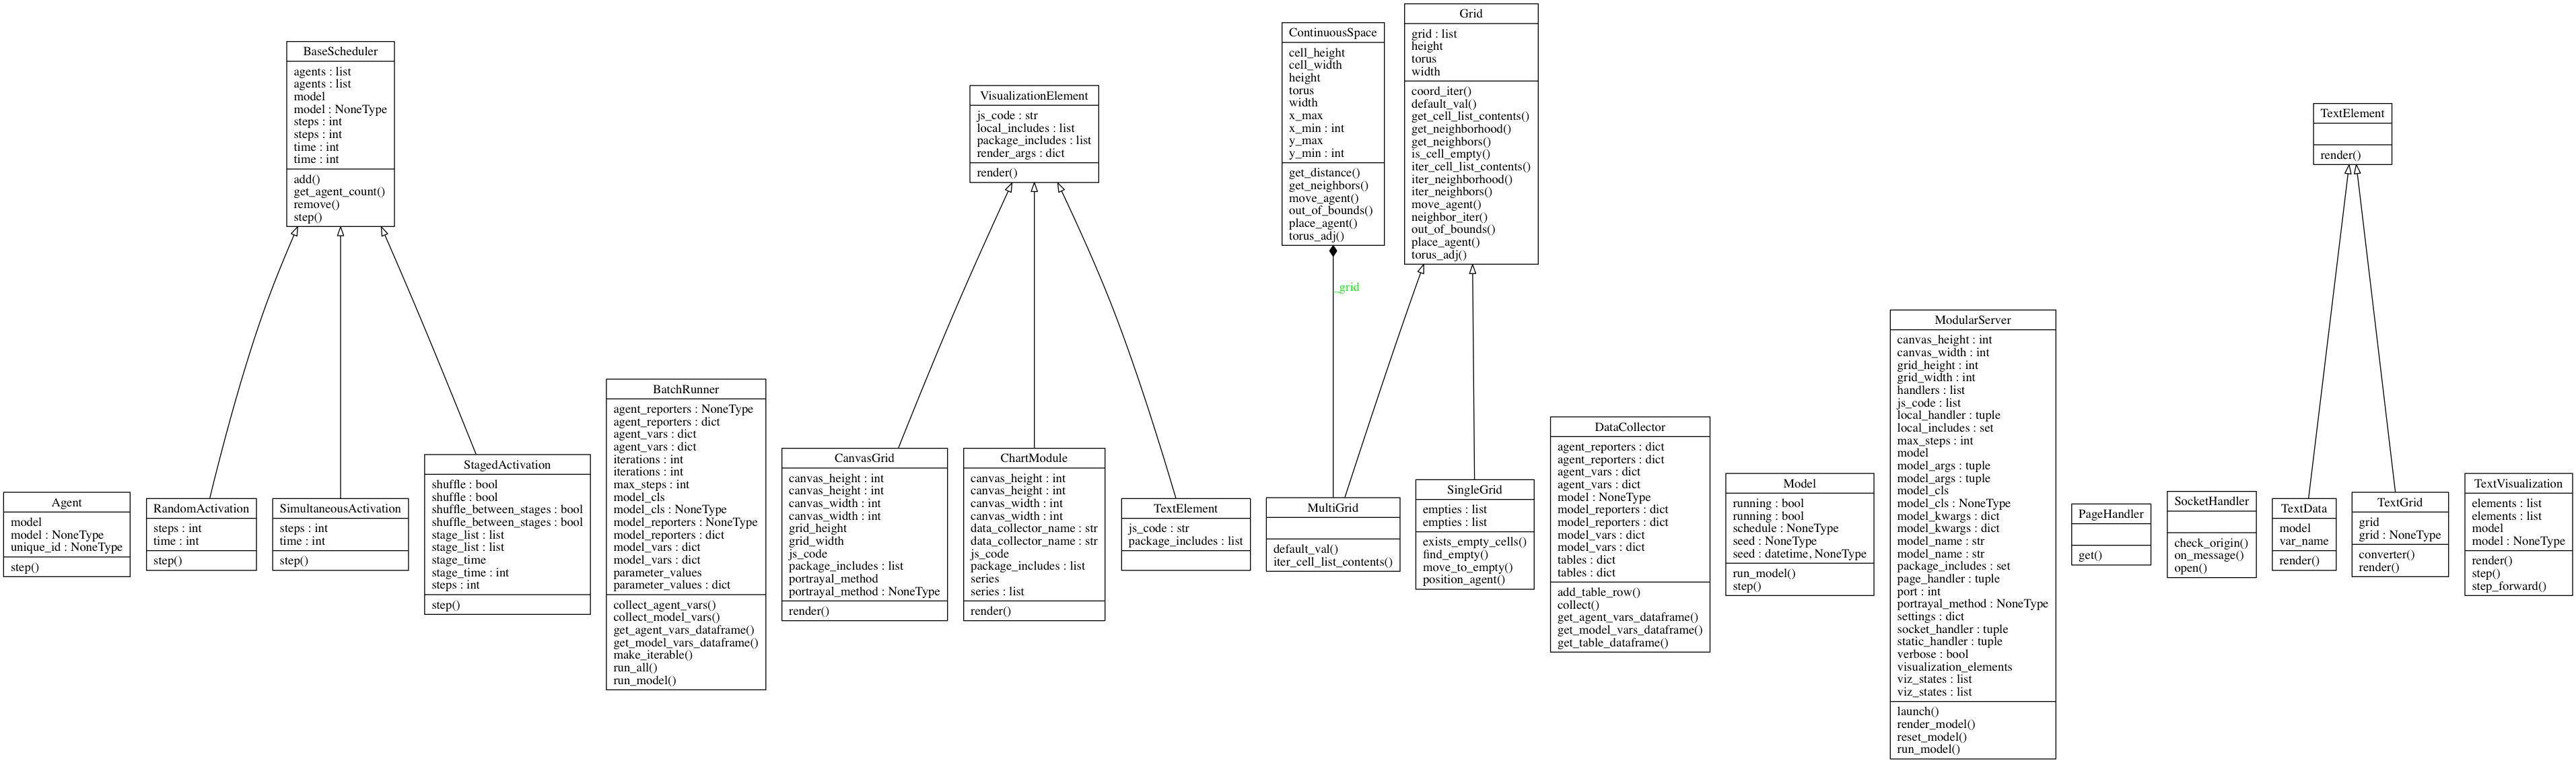 Class Diagram Example Class Diagram Viewer Application For Python3 Source Stack Overflow